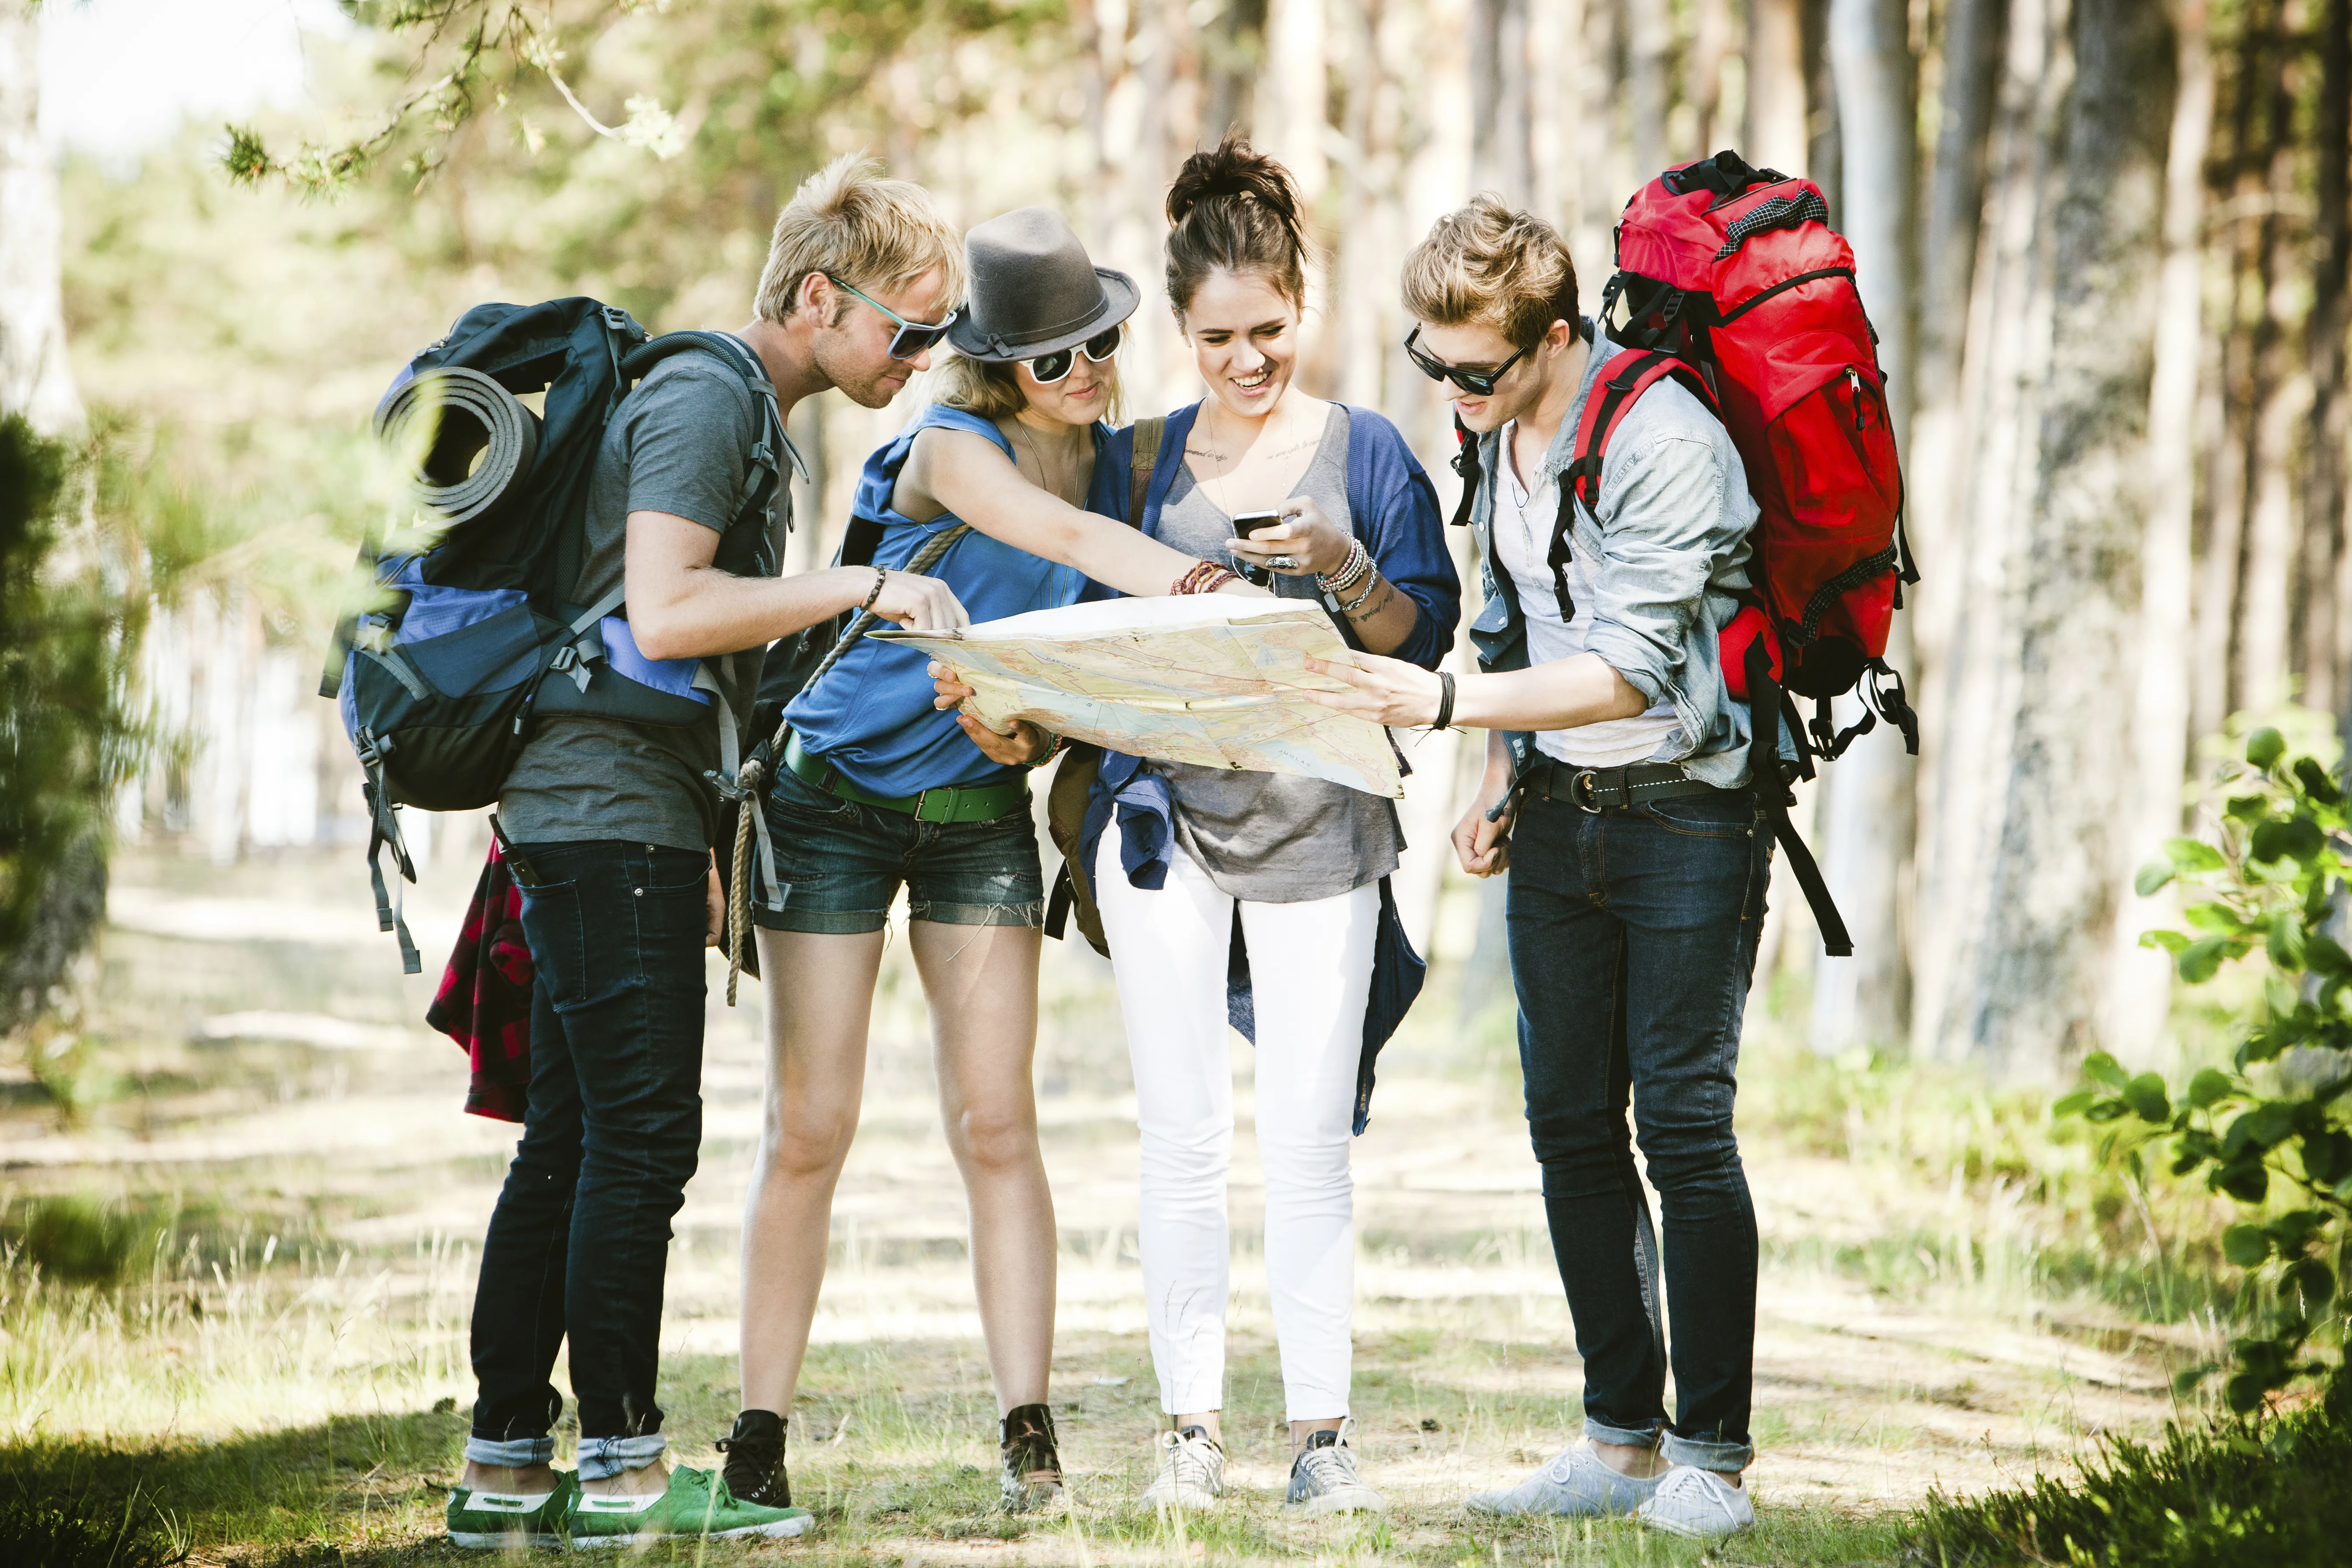 group-of-backpackers-464595679-downloaded-from-thinkstock-130115-on-invoice-14139941